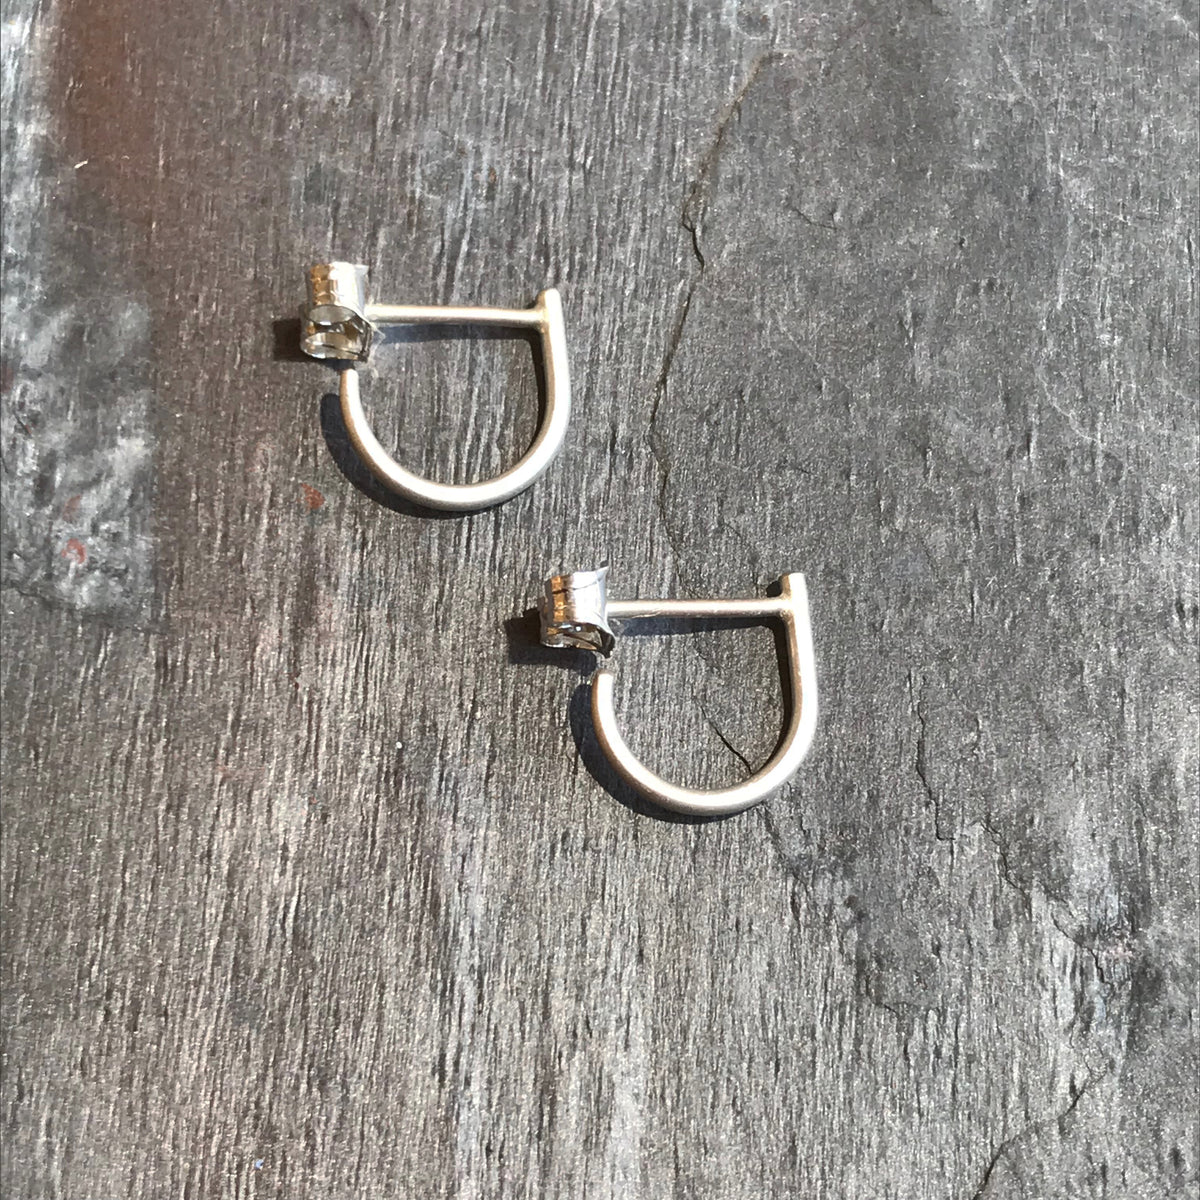 Small Silver Hugs earrings by Colleen Mauer at Garden of Silver in Westhampton Beach, New York.